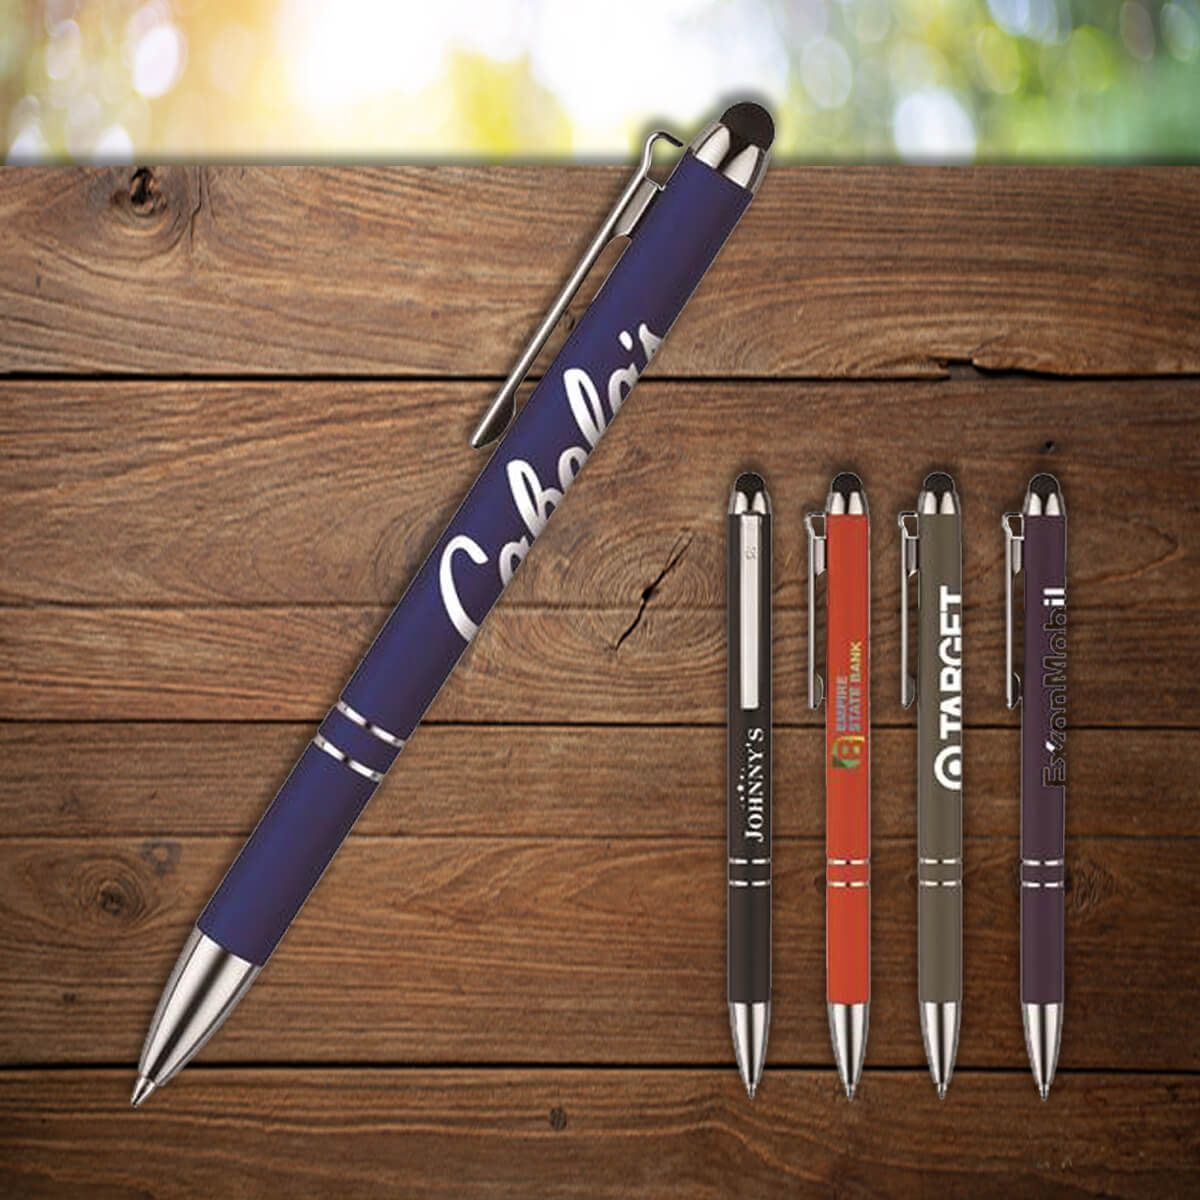 Variety of color and imprints shown custom stylus pens promotional writing implements by curative printing